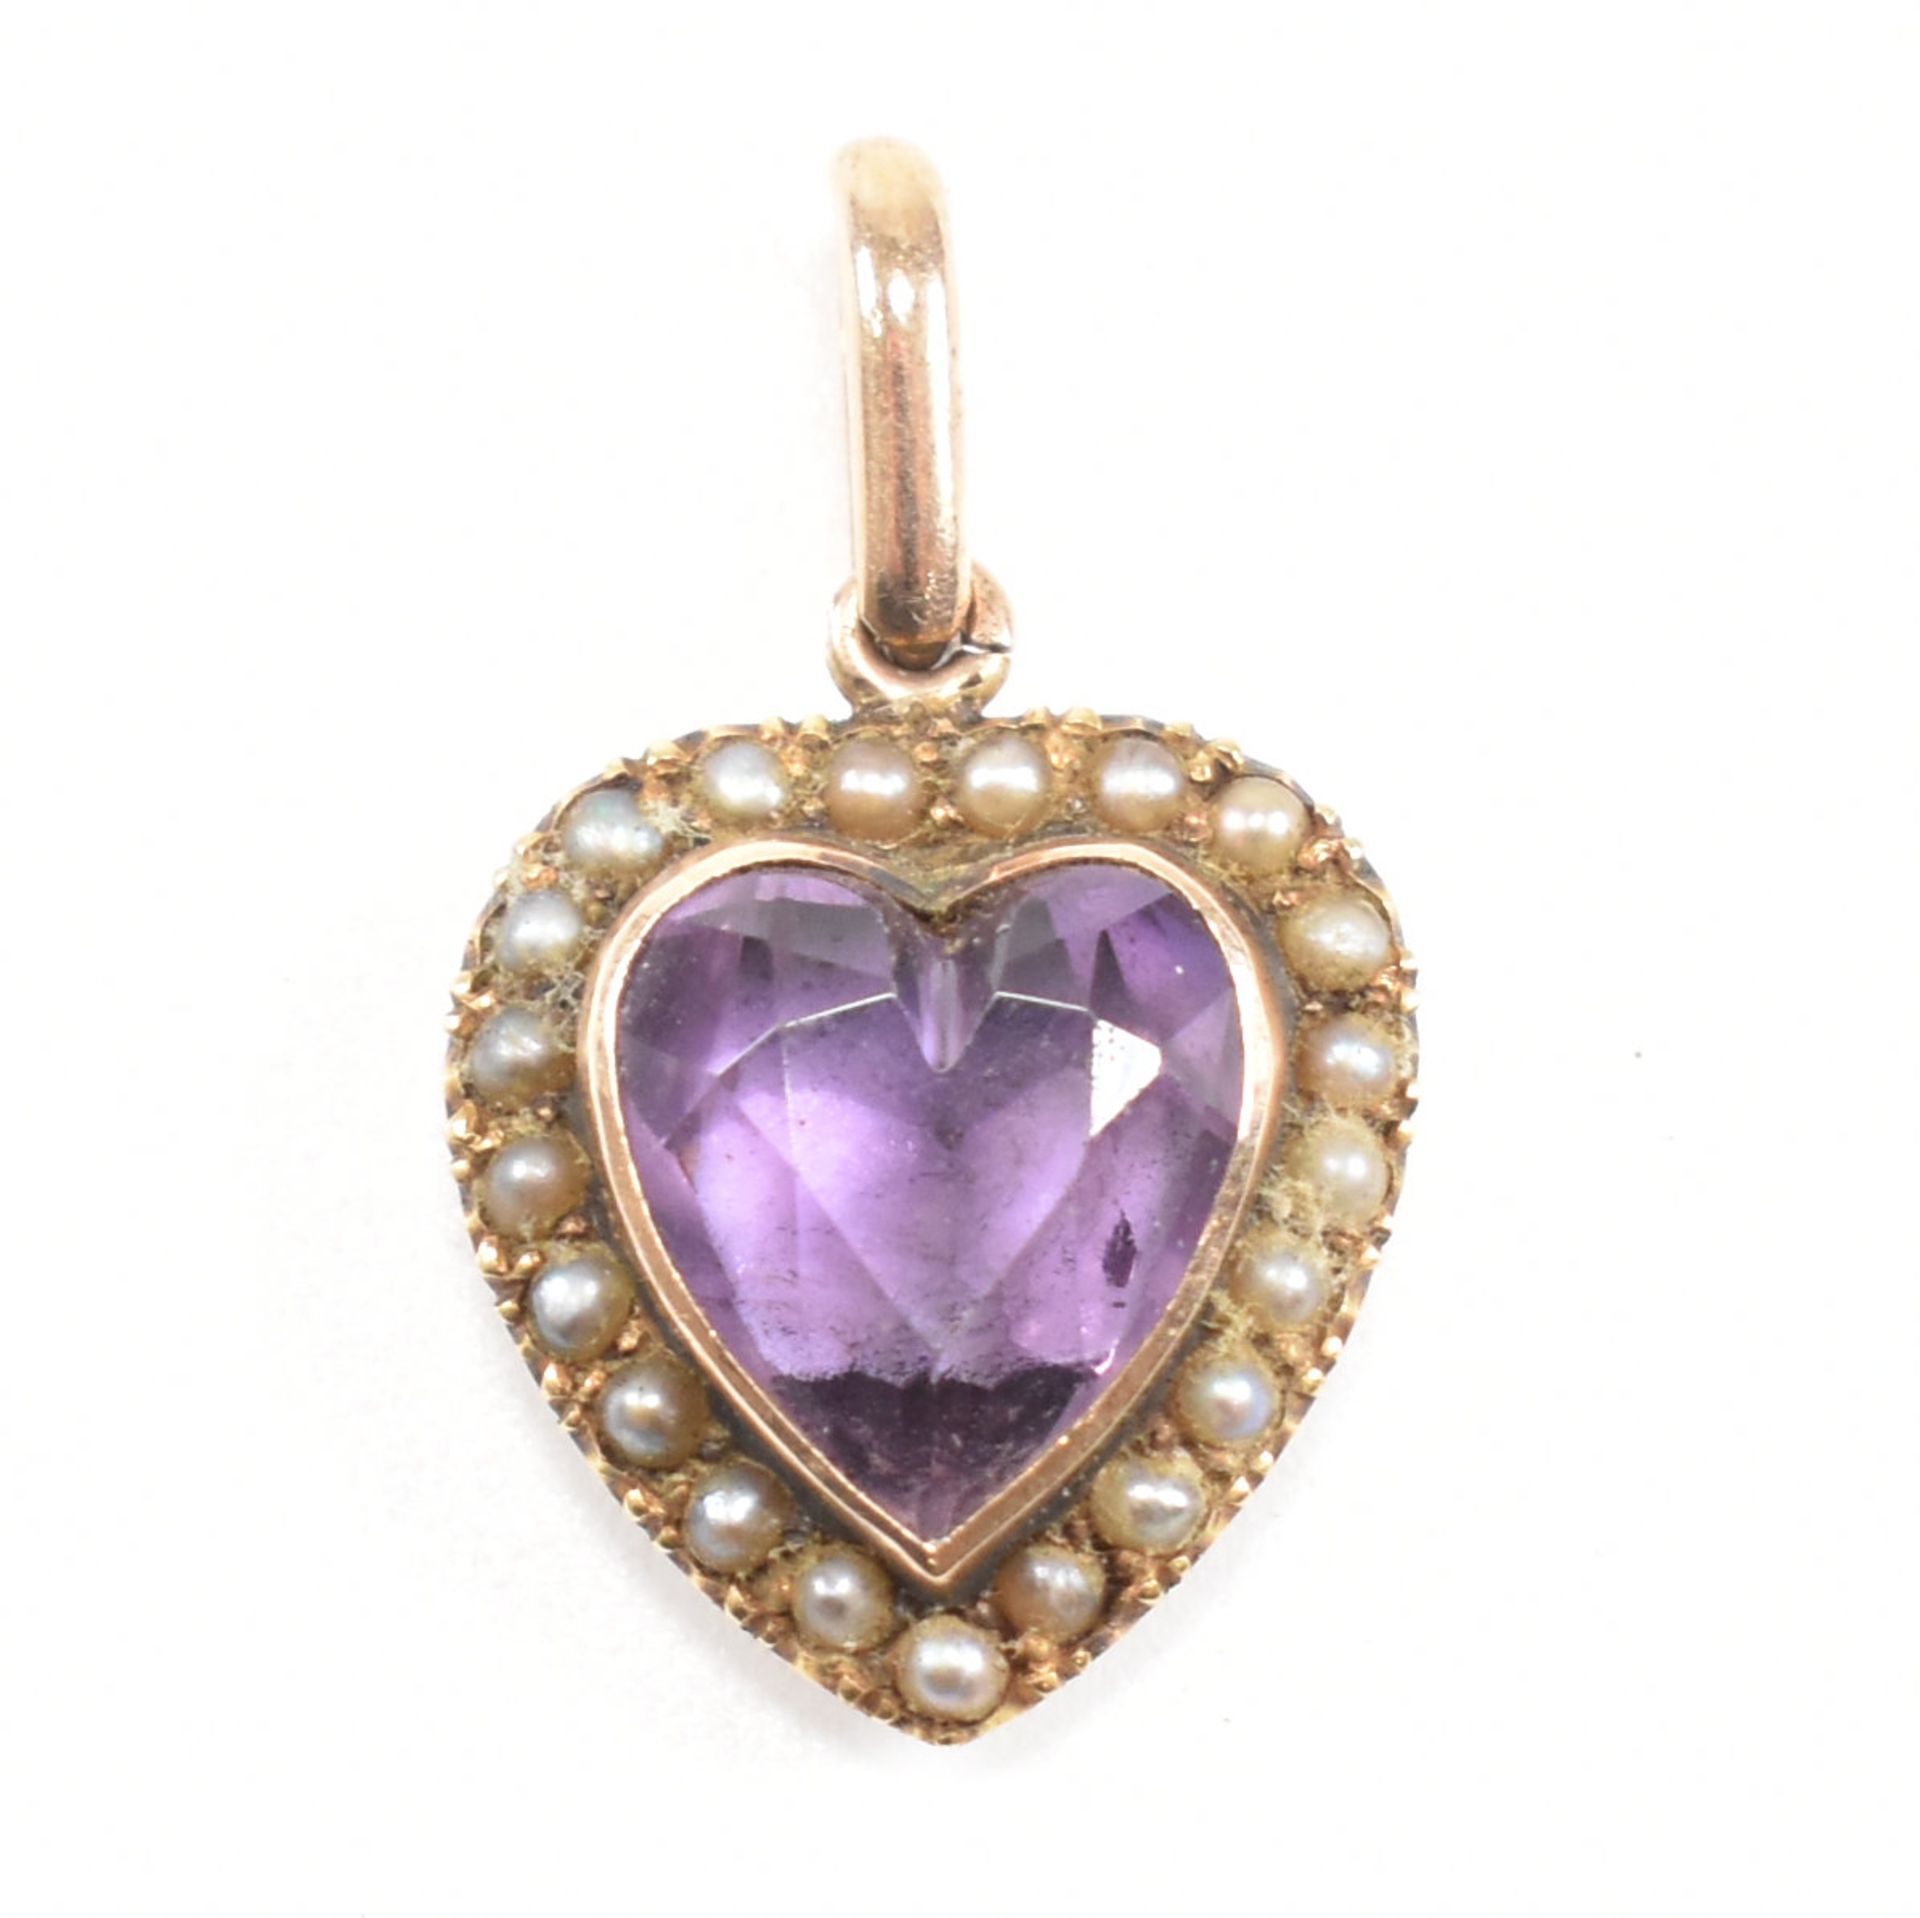 19TH CENTURY GOLD AMETHYST & PEARL HEART NECKLACE PENDANT - Image 2 of 5